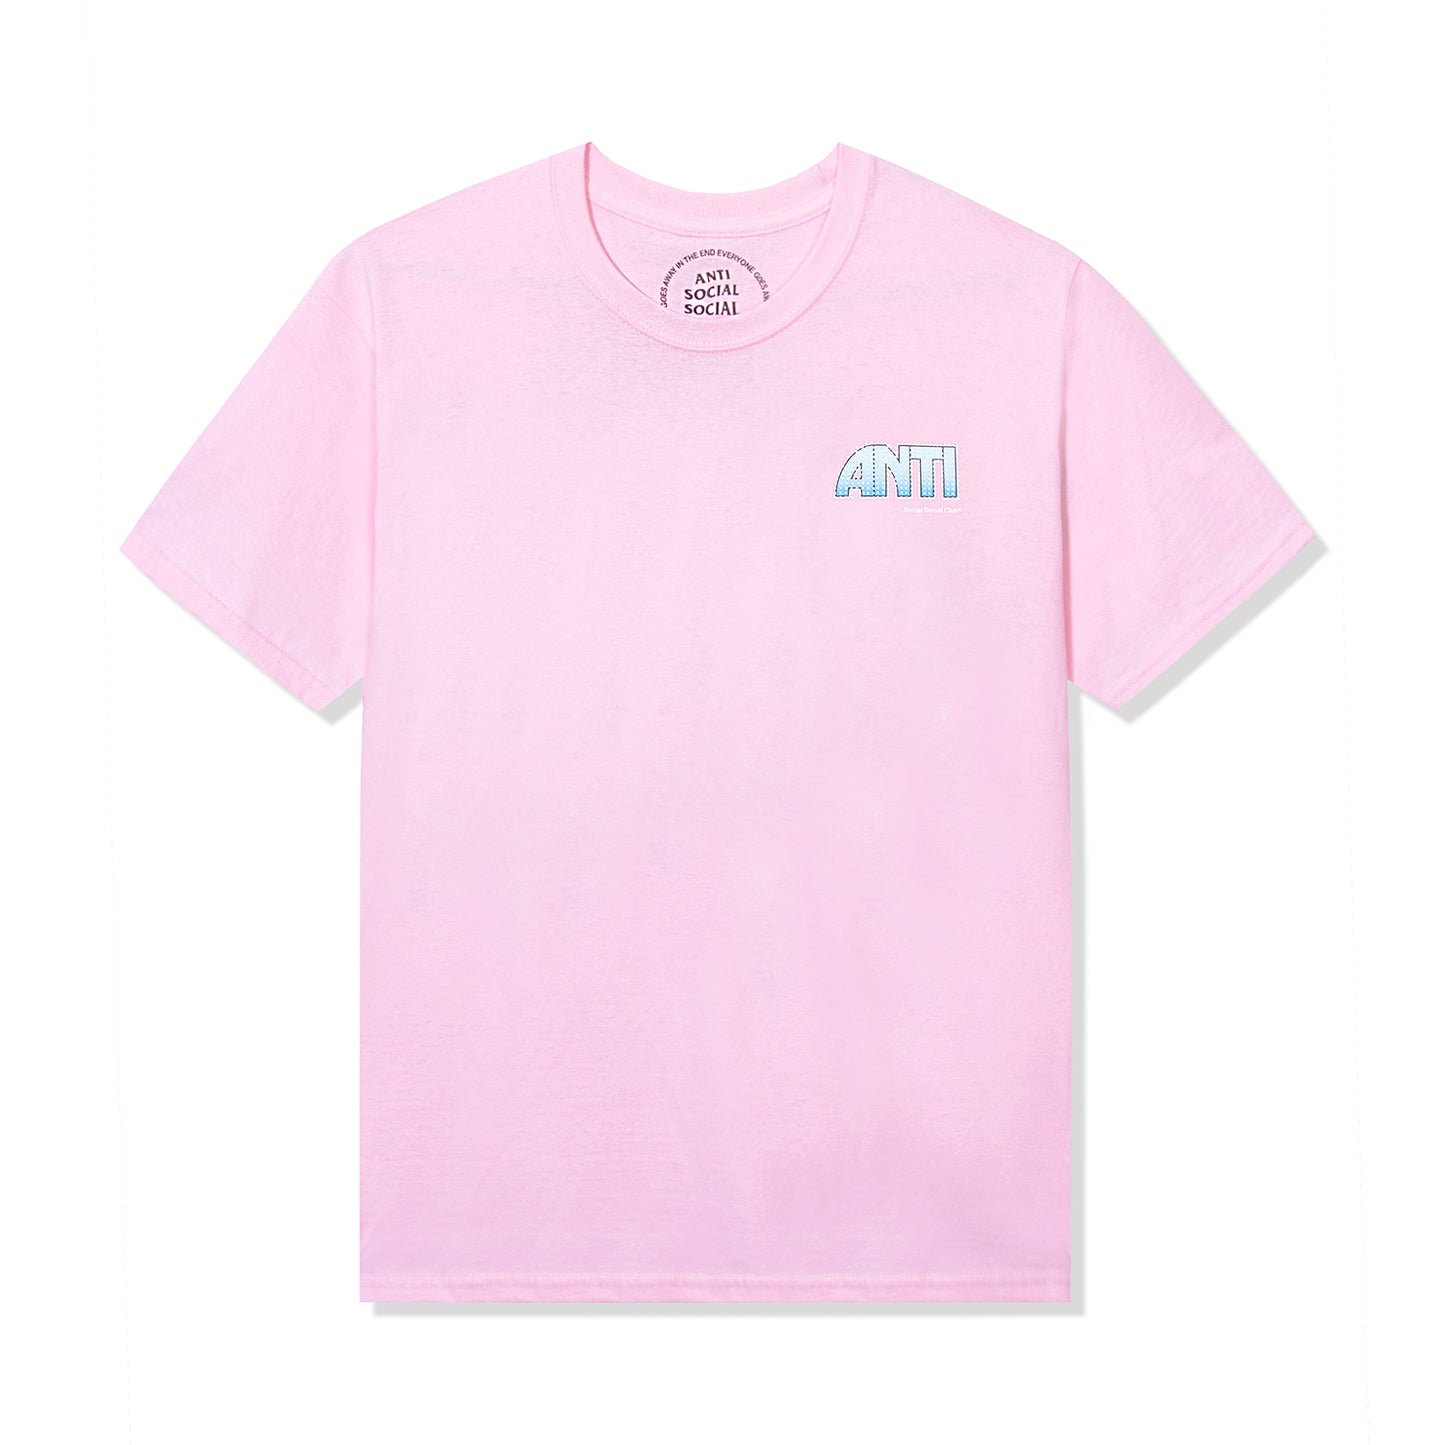 Sunsets and Car Crashes Tee - Pink